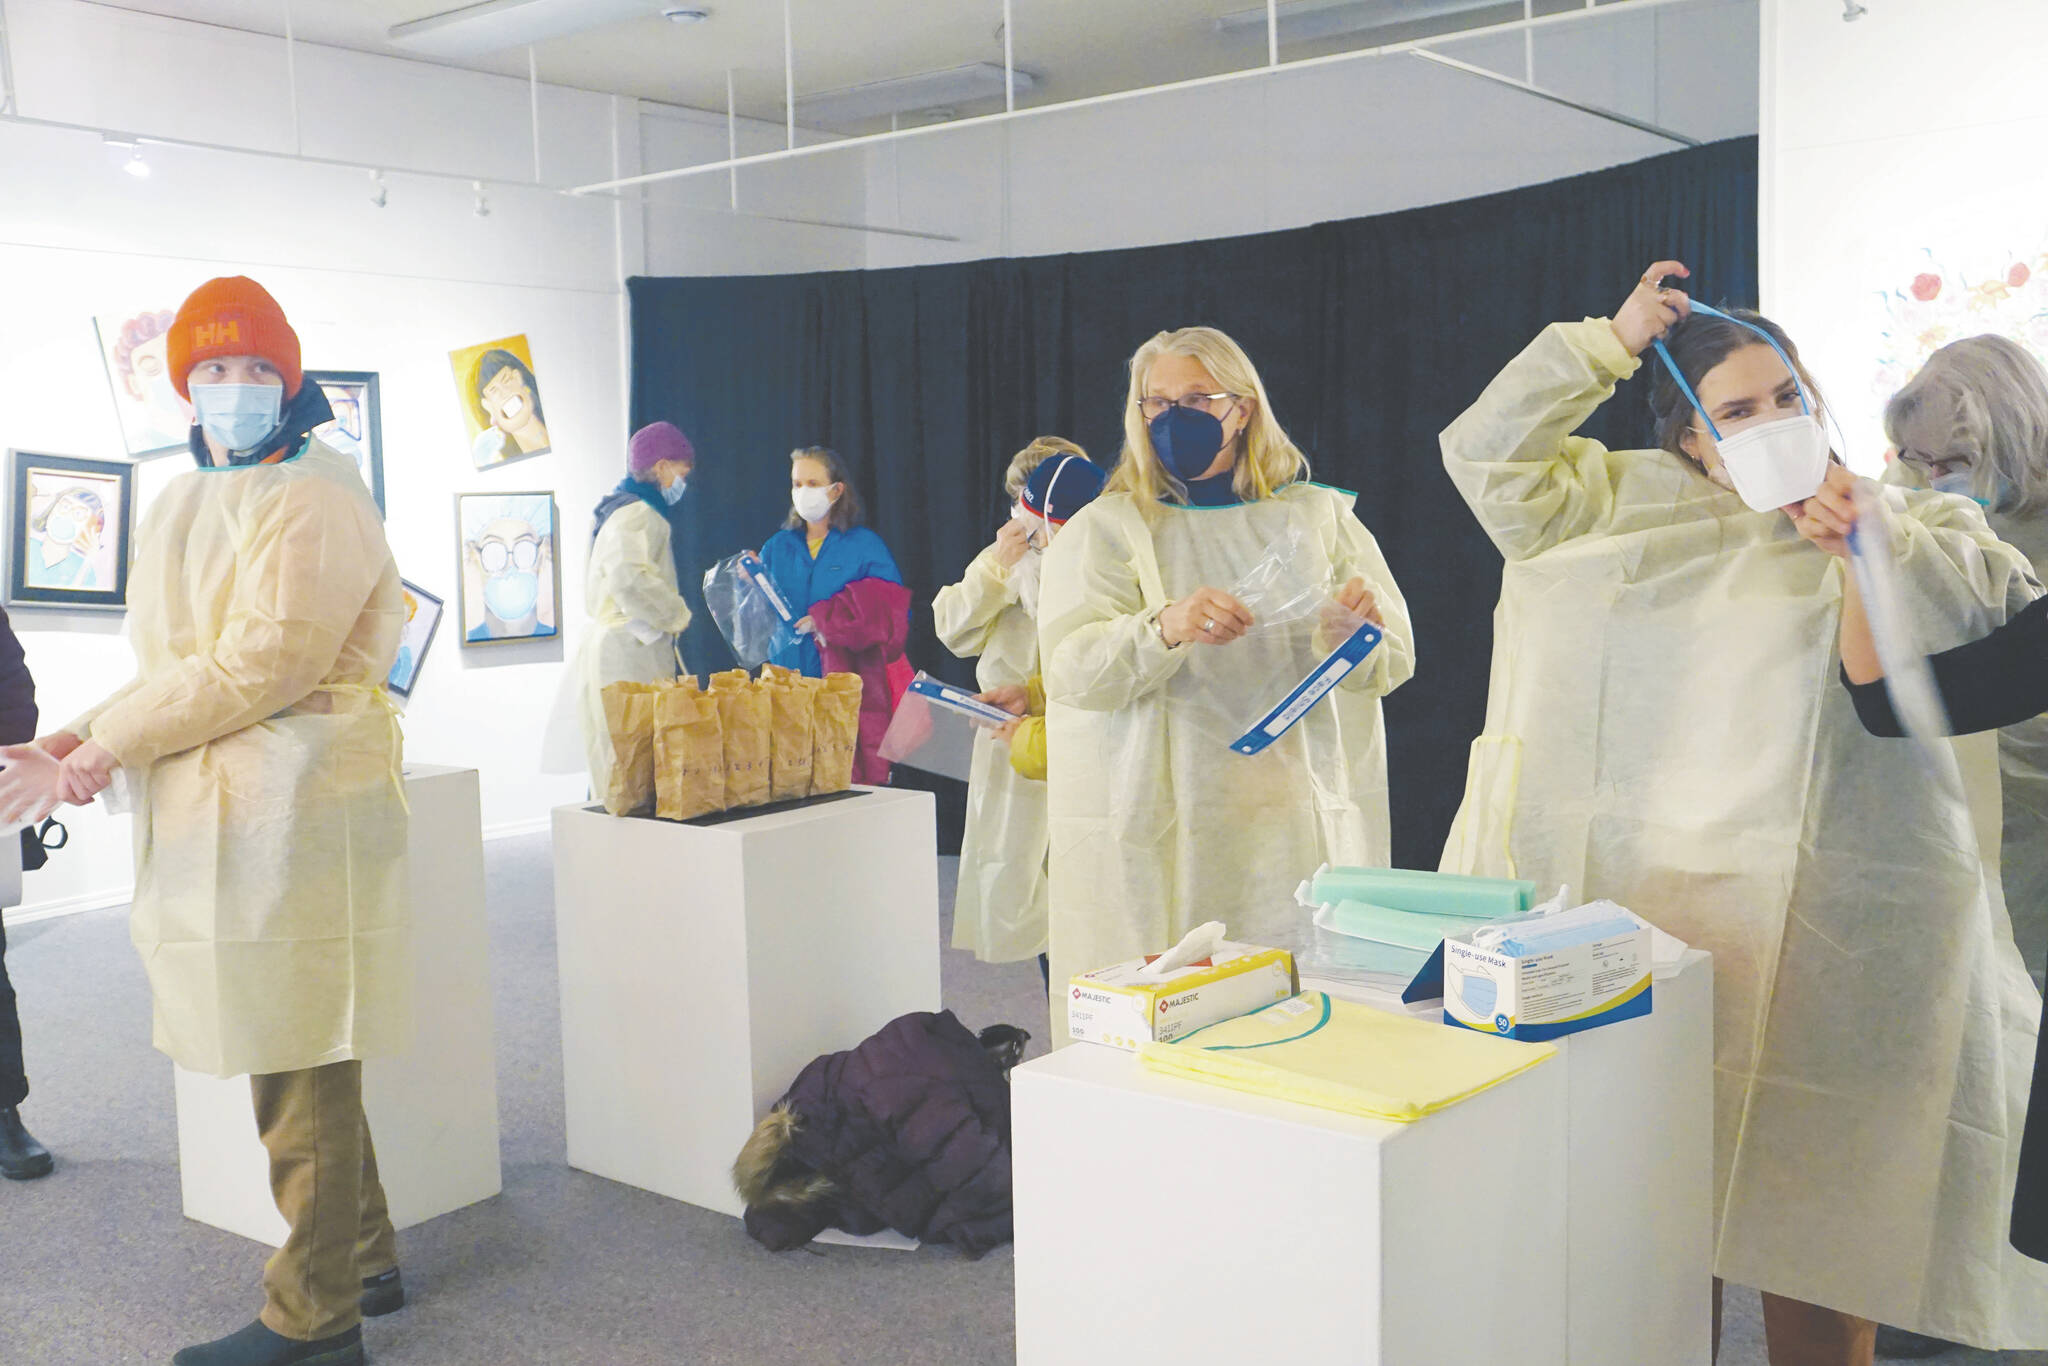 Photo by Michael Armstrong/Homer News 
Visitors put on personal protective equipment before an artist talk by Dr. Sami Ali’ at the Jan. 7 First Friday opening of her exhibit, “The Mind of a Healthcare Worker During the COVID-19 Pandemic,” at the Homer Council on the Arts.